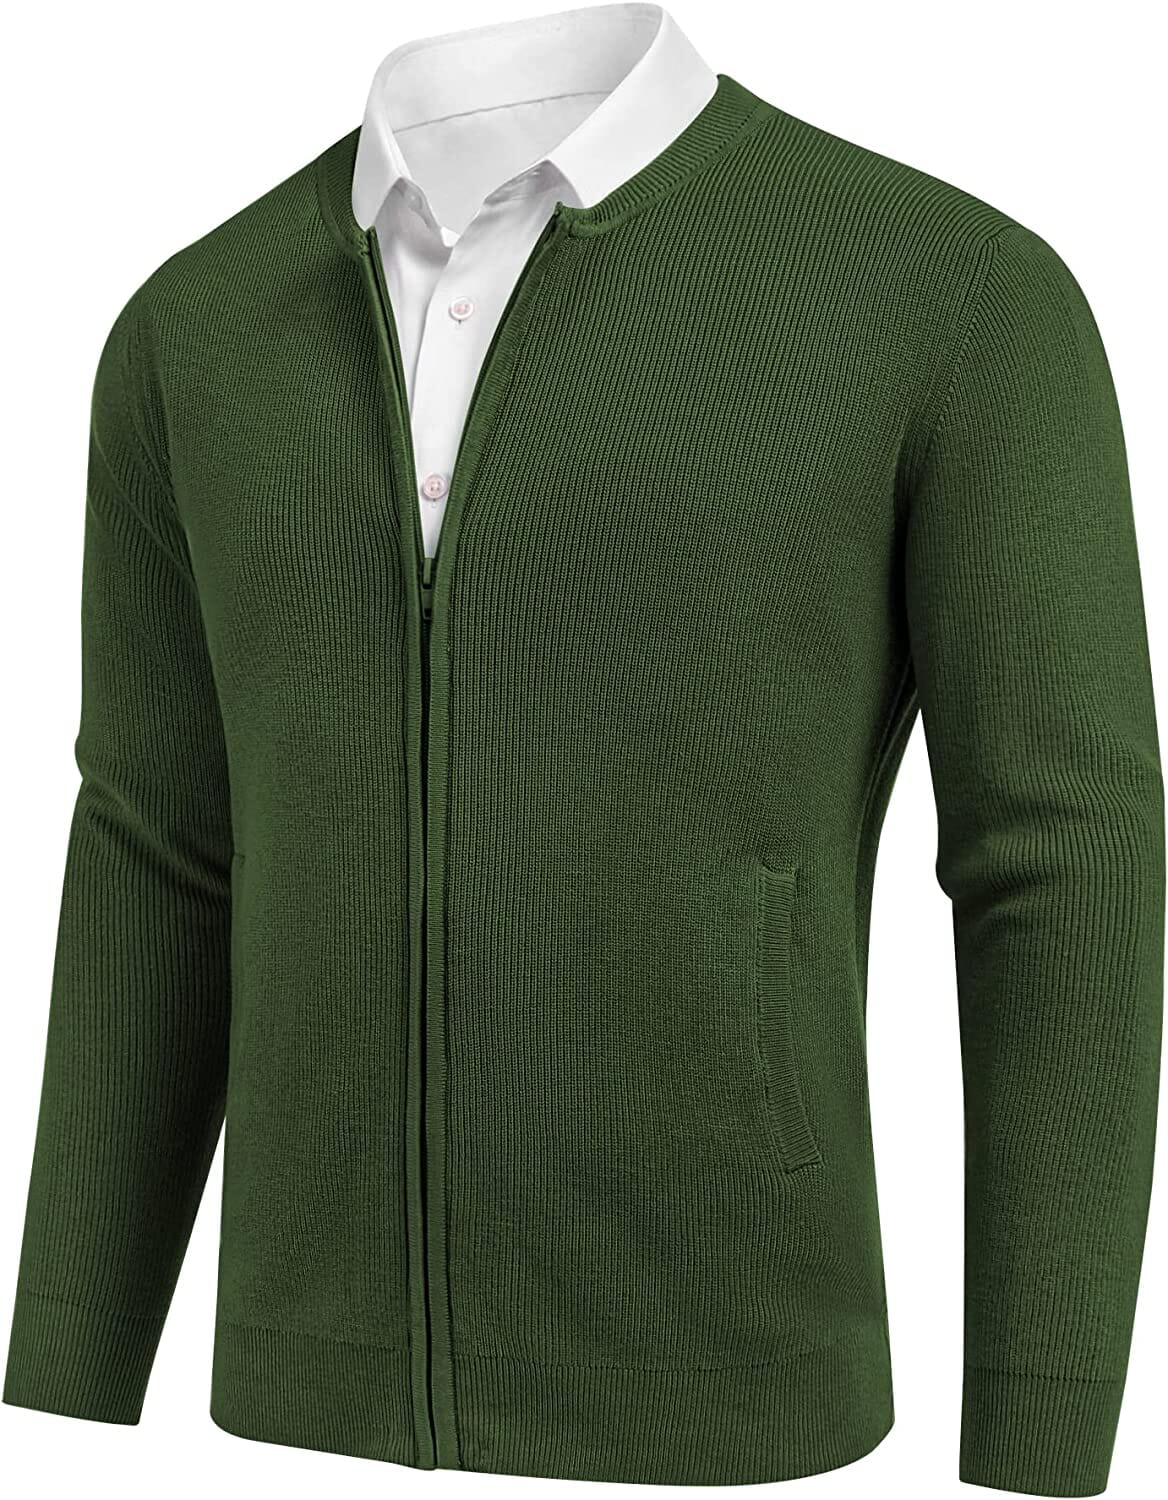 Full Zip Slim Fit Stylish Knitted Cardigan Sweater with Pockets (US Only) Sweaters COOFANDY Store Army Green S 